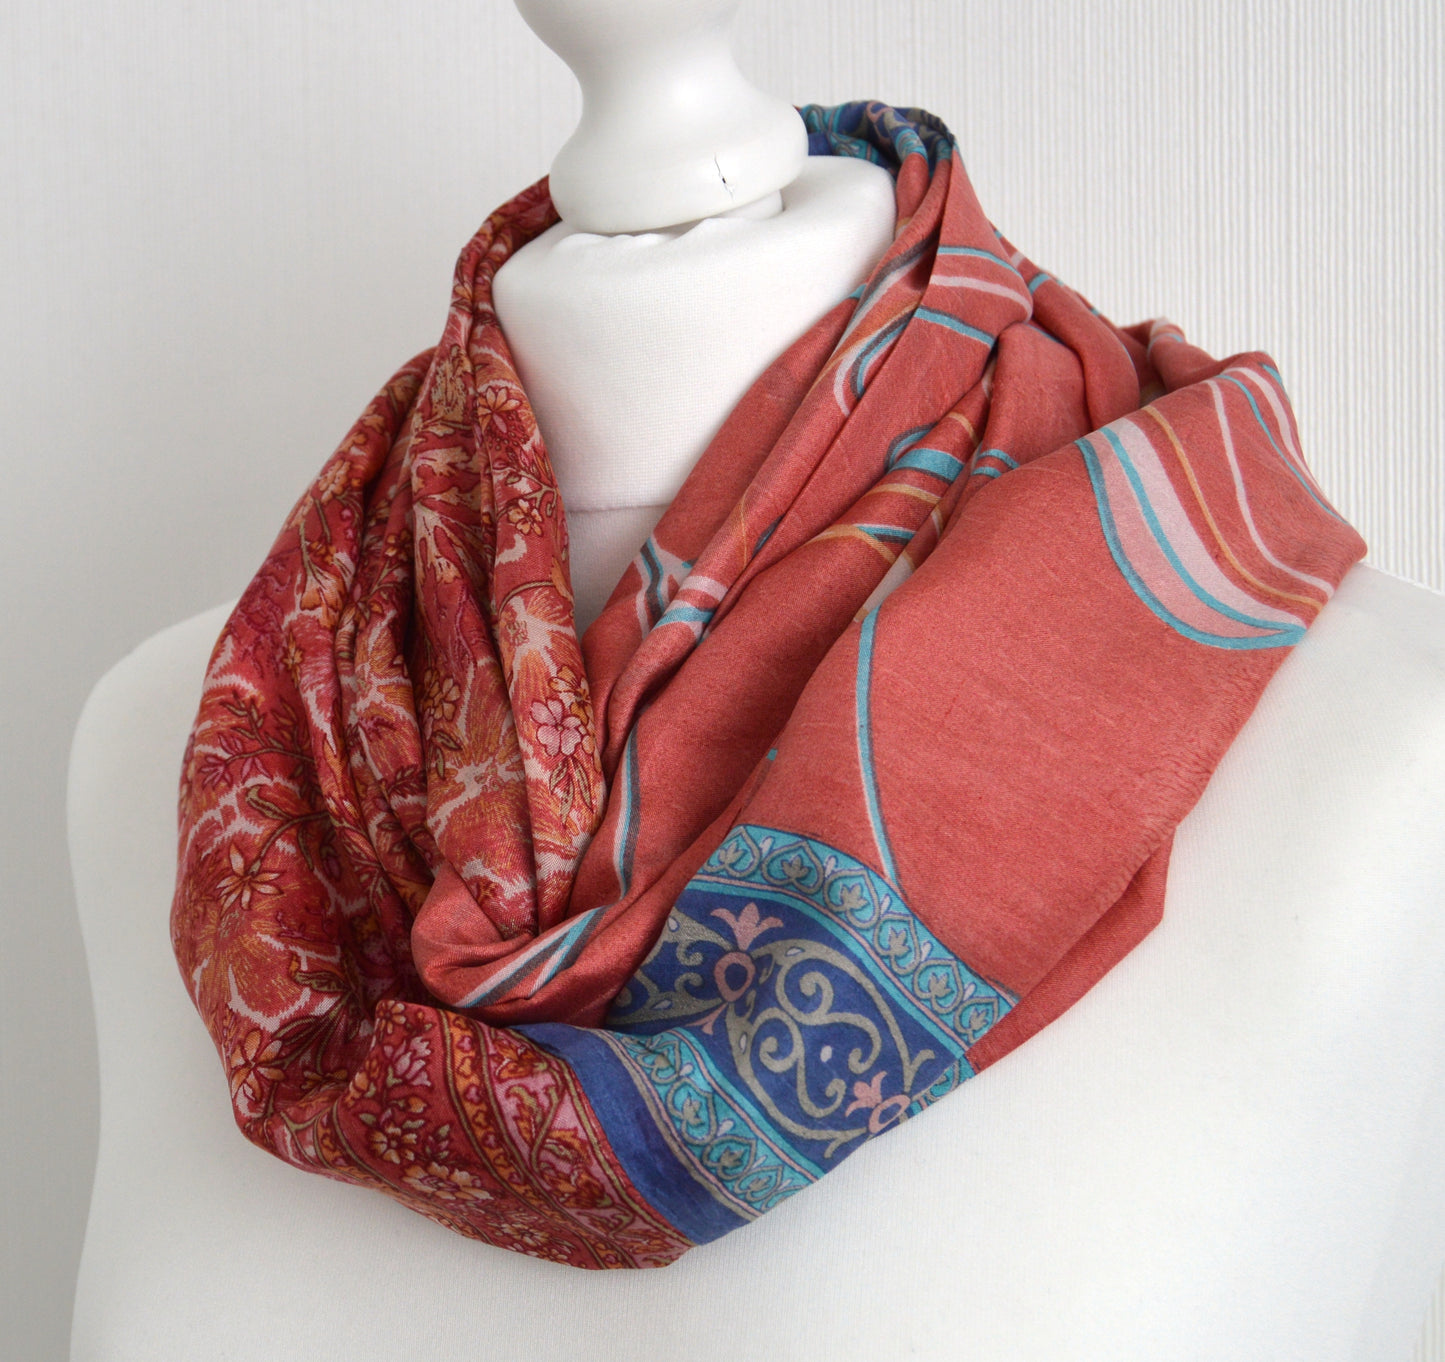 Salmon Aqua Upcycled Vintage Sari Silk Infinity Loop Scarf - Bohemian Eco Friendly Zero Waste Spring summer Trend Gift For Her